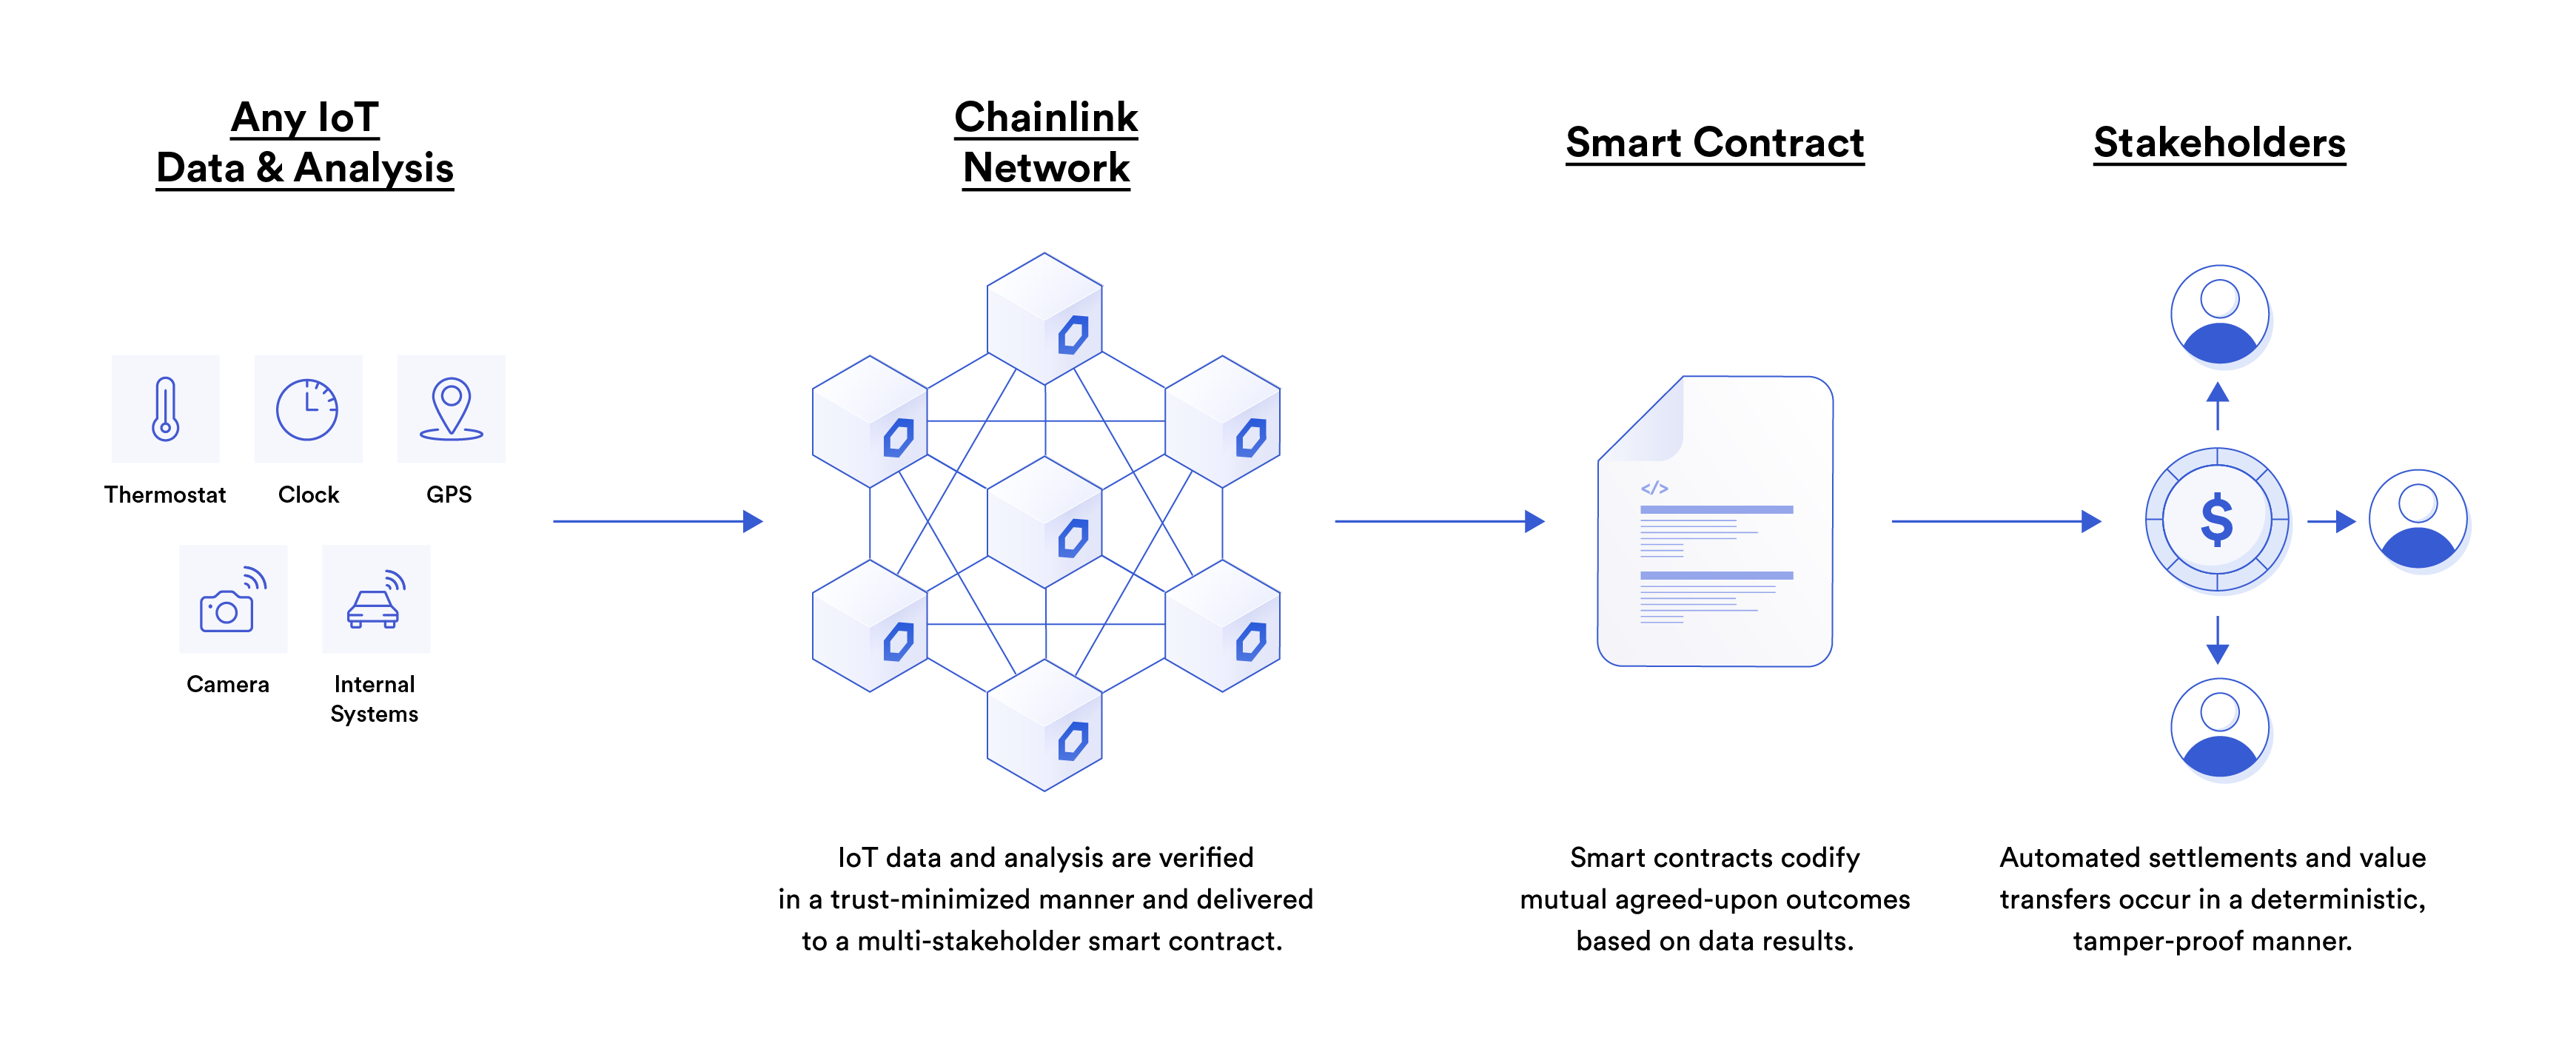 A diagram showing the end-to-end process for a multi-stakeholder IoT agreement using DONs and smart contracts.